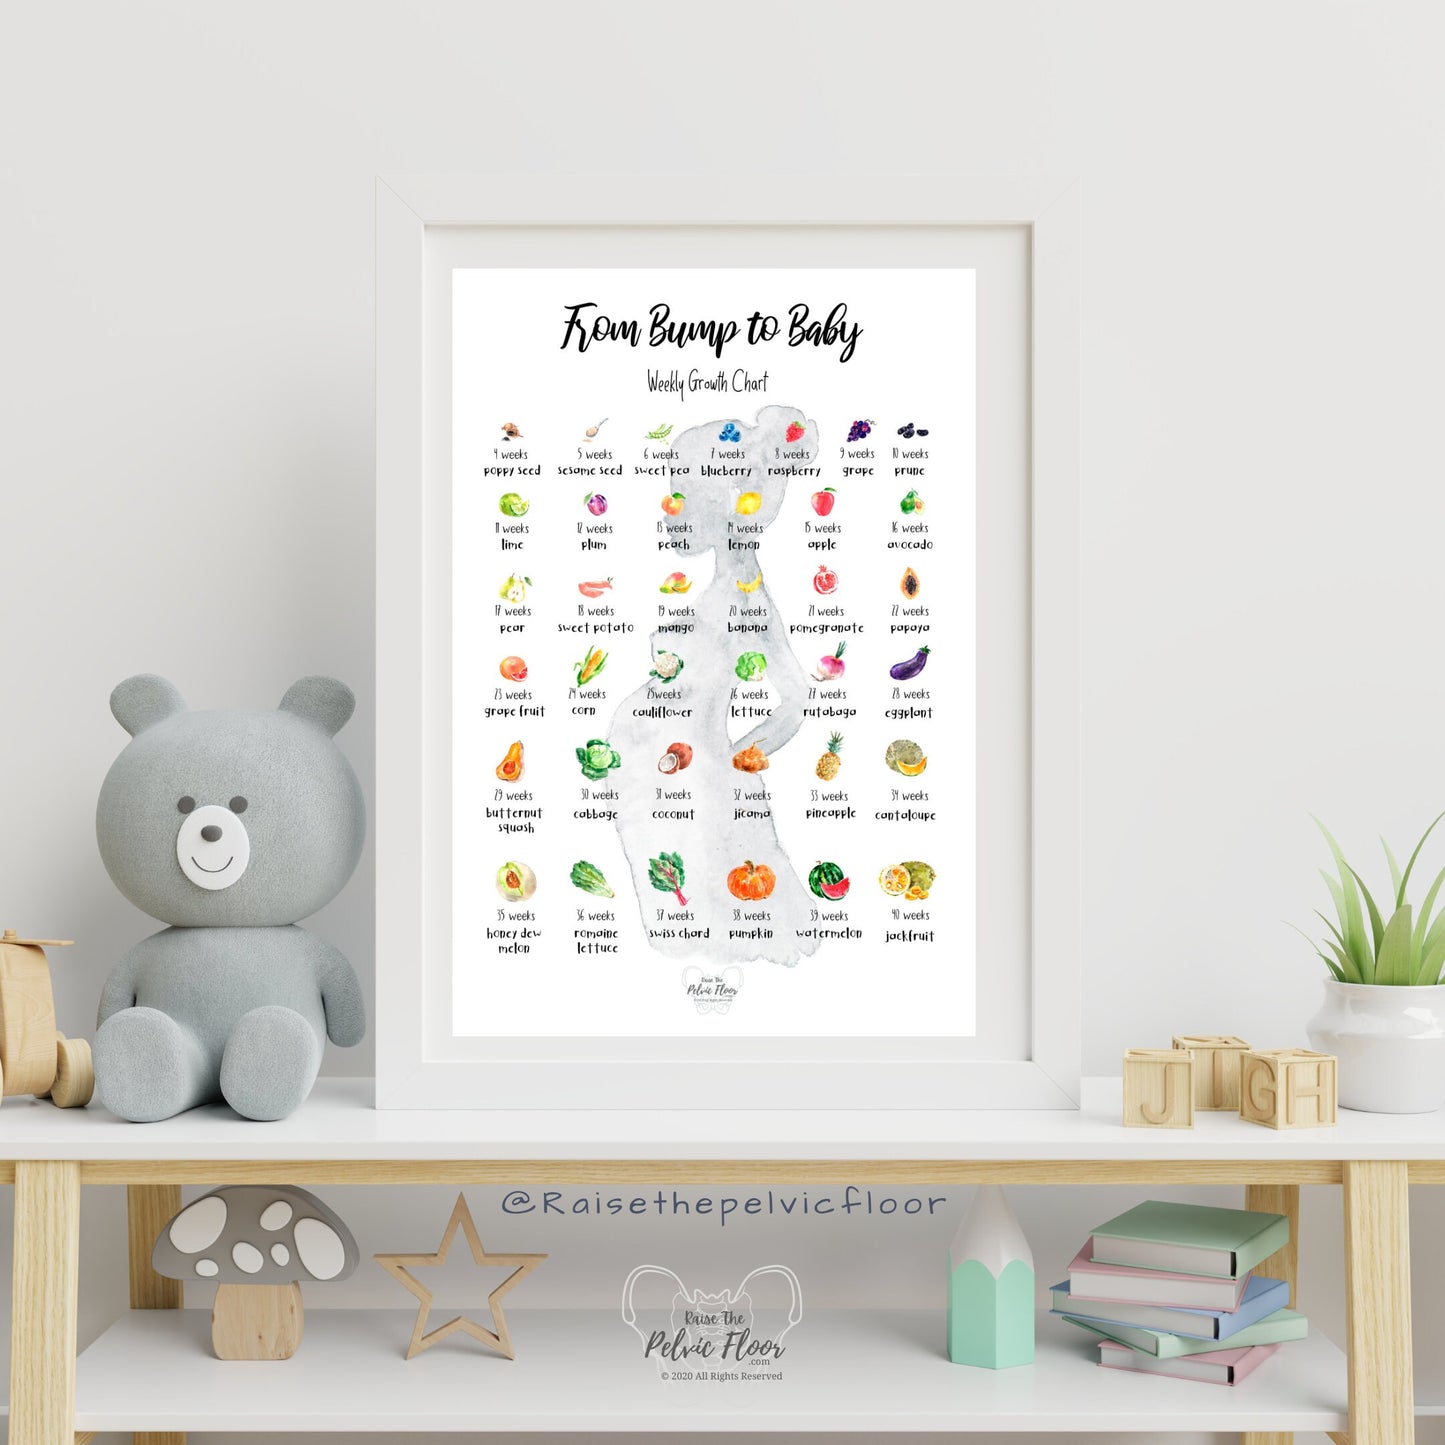 Bump to Baby- Pregnancy Art Weekly Fruit Growth Chart | Nursery Wall Poster Print